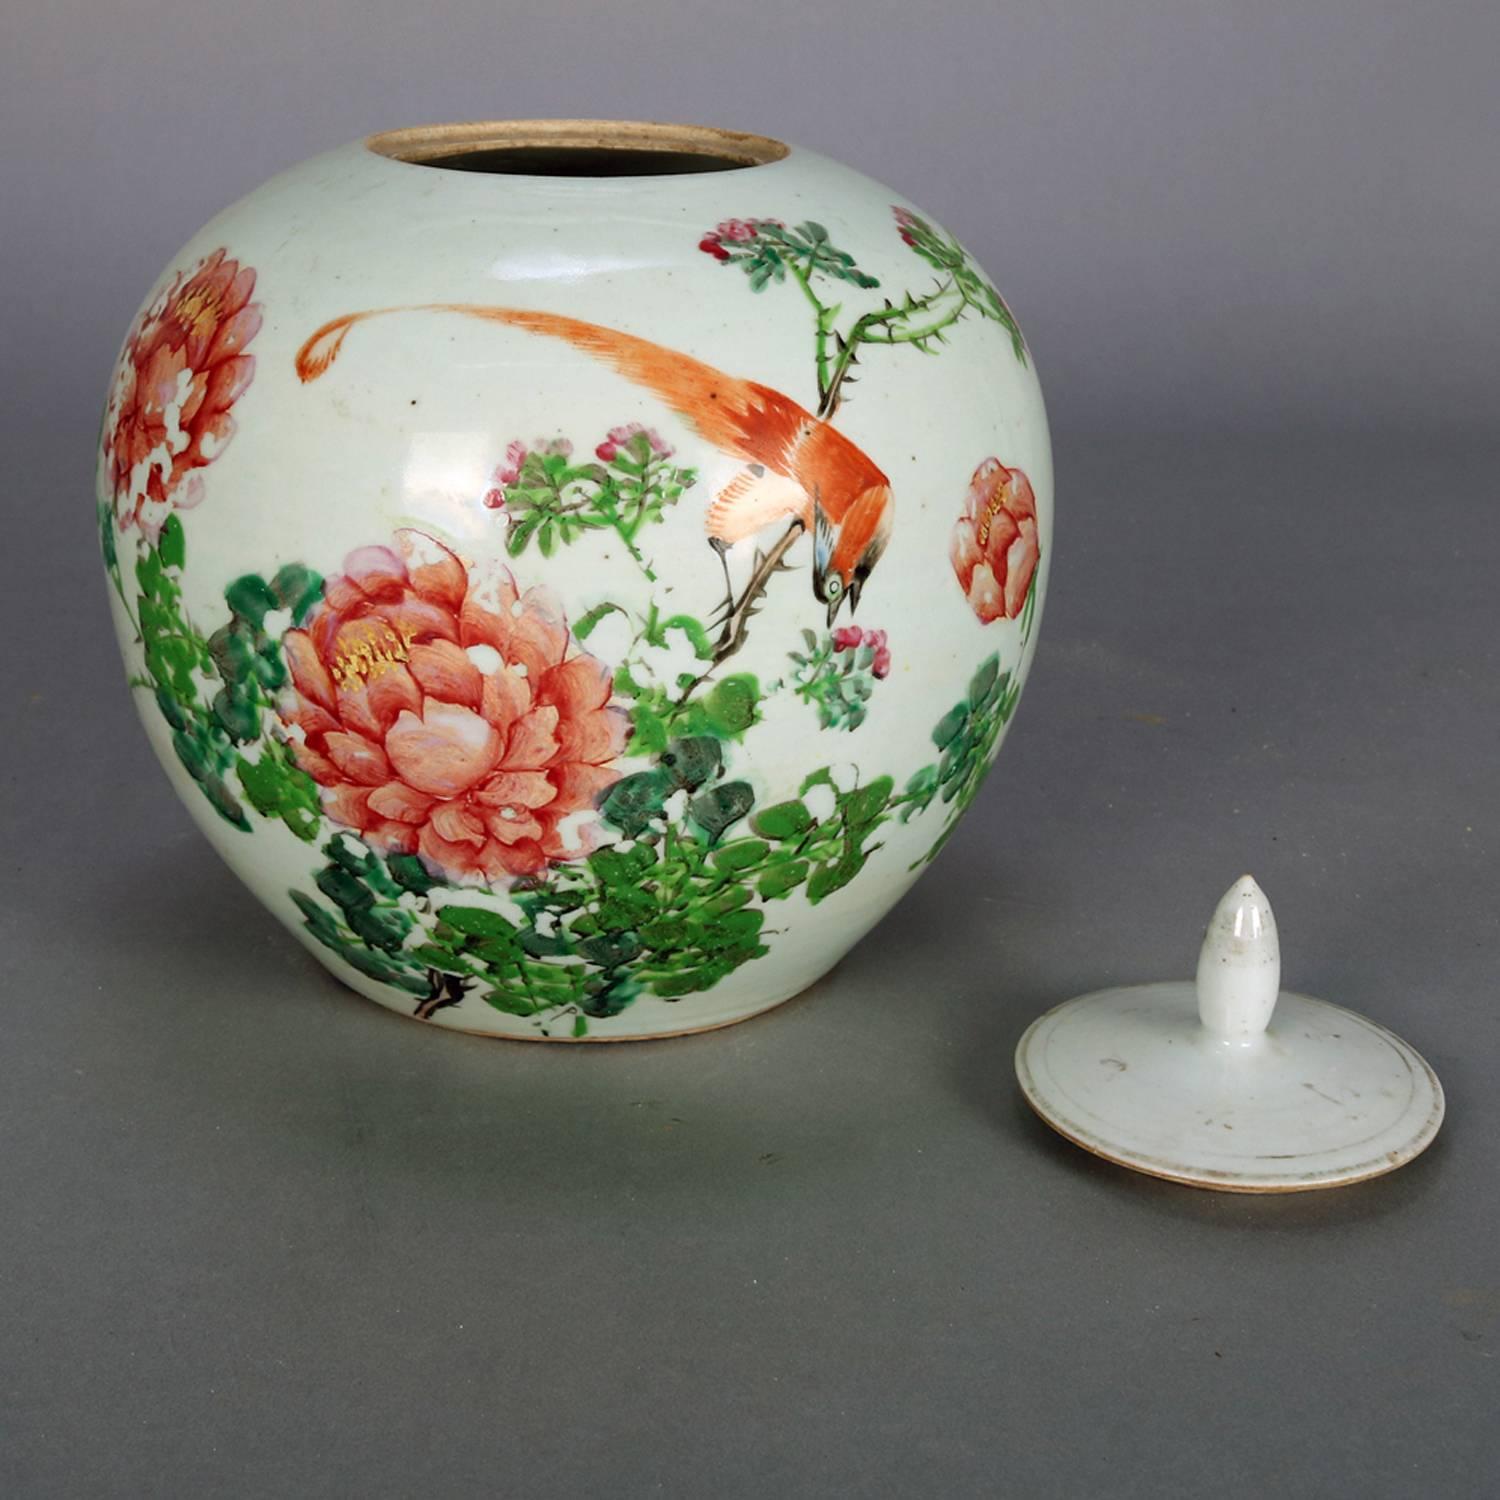 Antique Chinese hand-painted porcelain lidded ginger jar features floral garden scene with bird of paradise, gilt highlights, en verso chop marks, 19th century.

Measures: 10